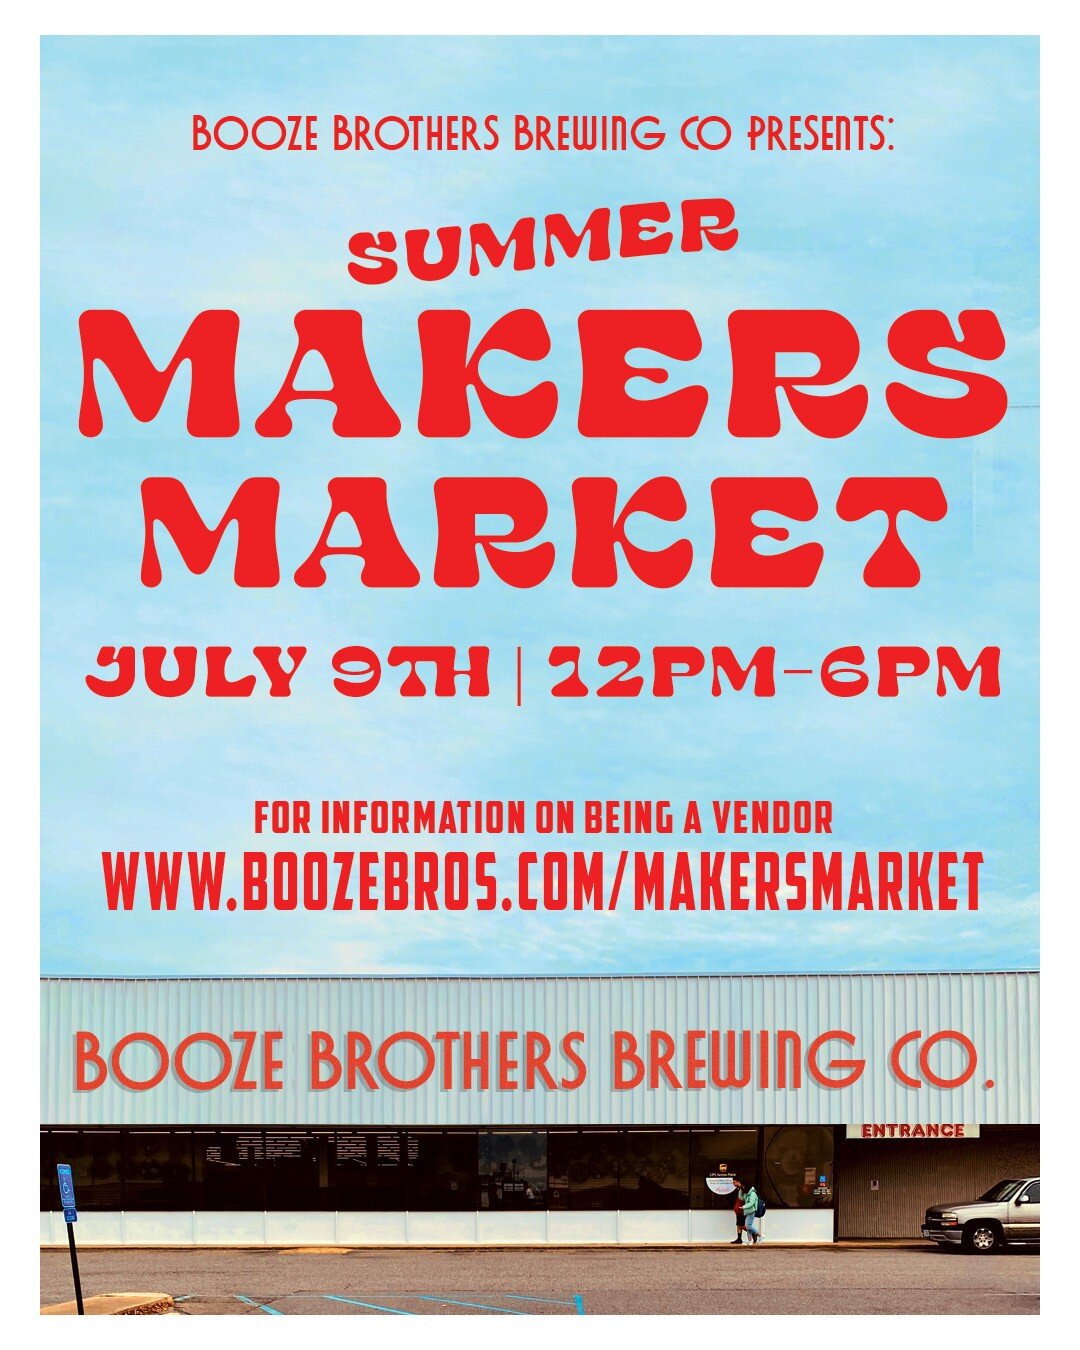 CALLING ALL MAKERS OF RAD THINGS!

We are having our Summer Makers Market on Sunday July 9th! We are now accepting vendors! 

Please visit: www.boozebros.com/makersmarket
and fill out the form &amp; find out all the information you'll need! 
.
.
.
.
